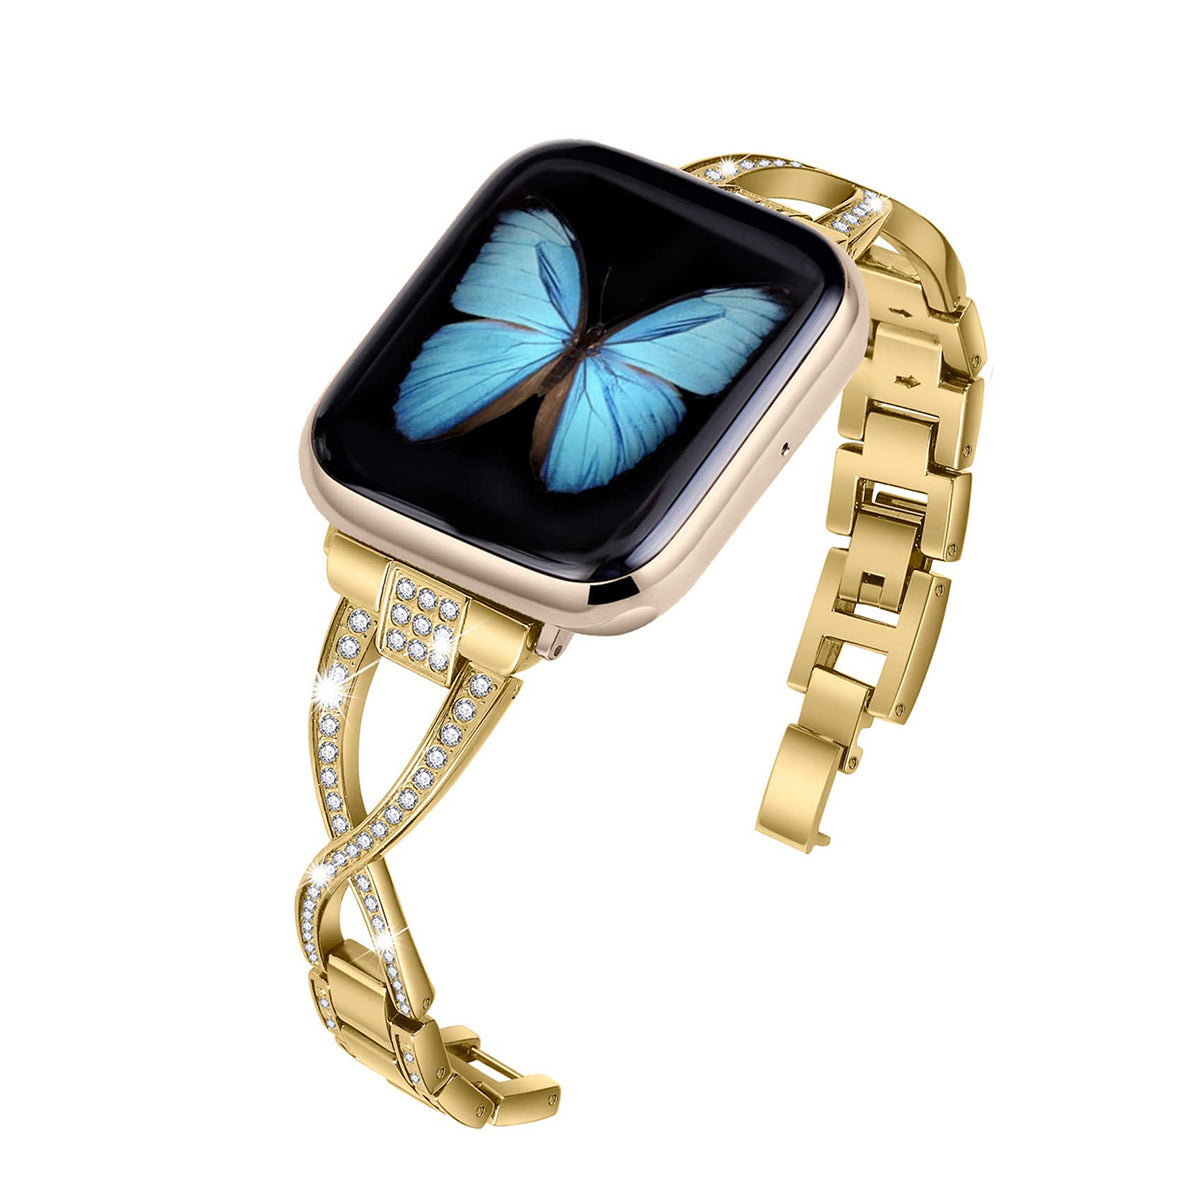 Luxury Stainless Steel Bracelet with Rhinestones Apple Watch Bands for All Series